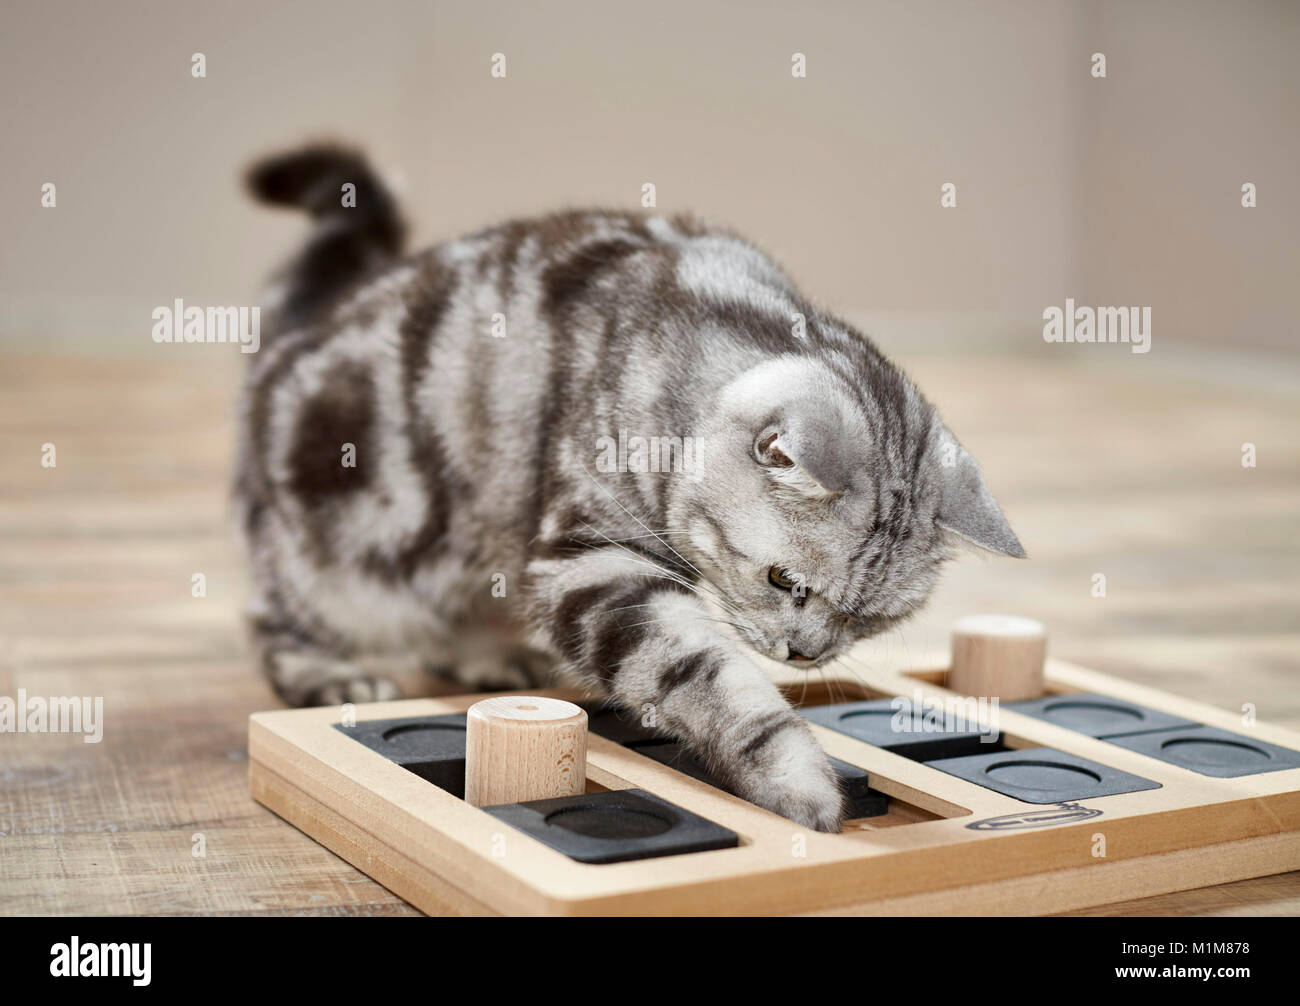 British Shorthair cat. Tabby adult playing with food-dispensing labyrinth game. Germany Stock Photo